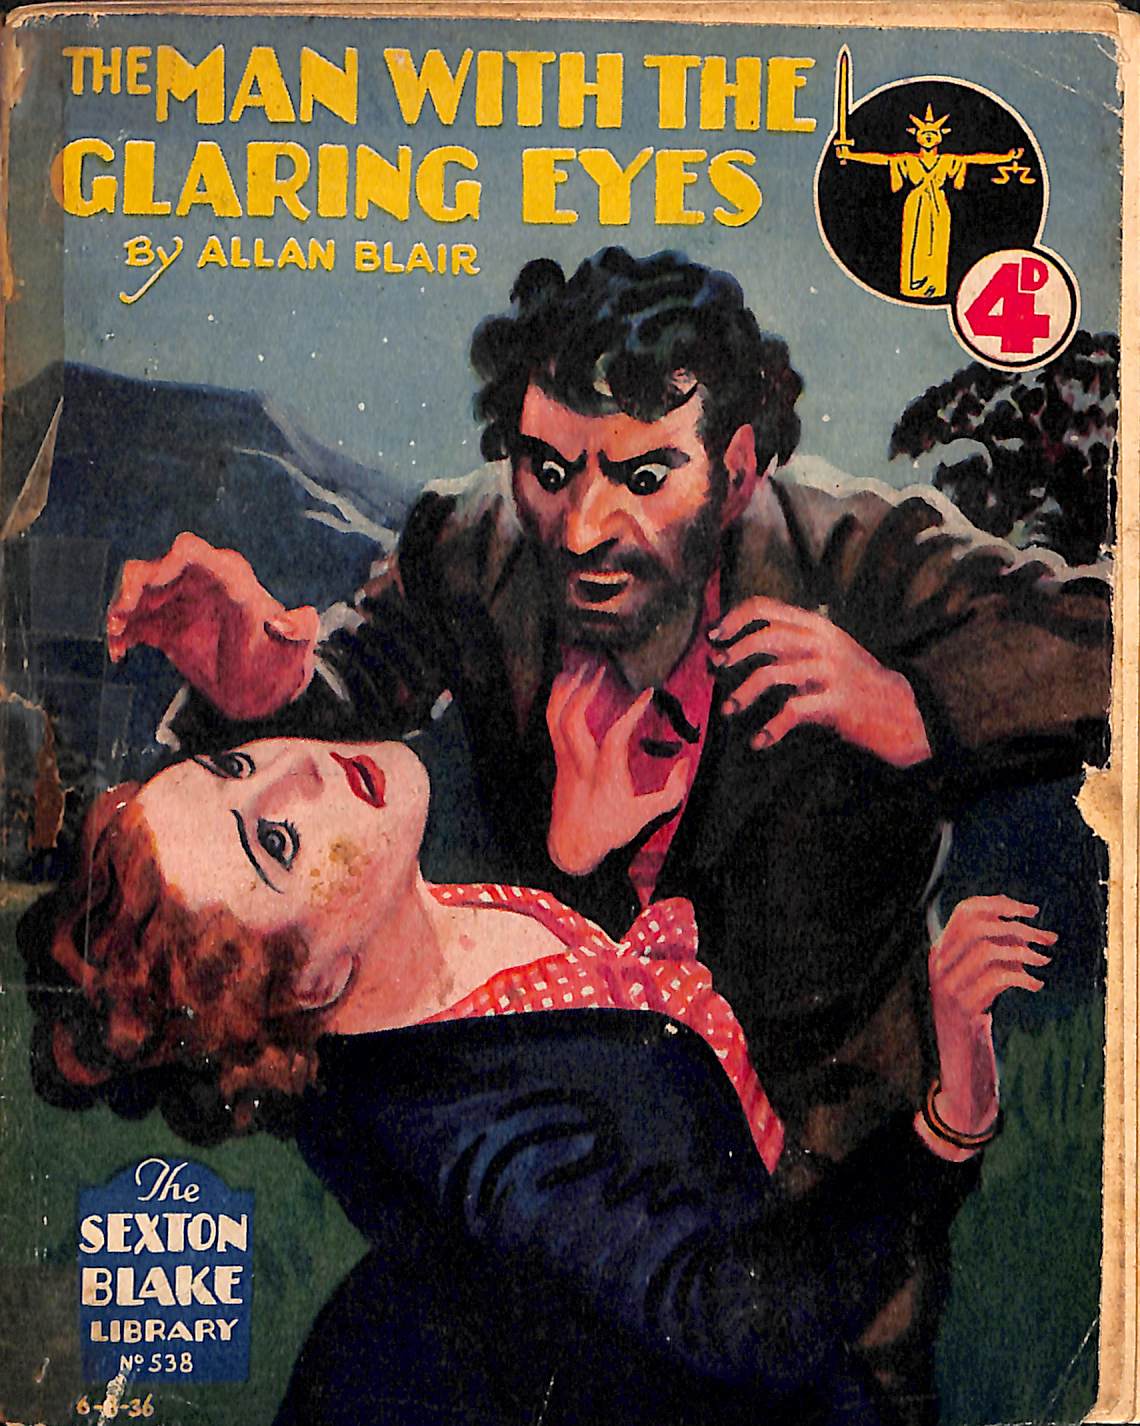 Book Cover For Sexton Blake Library S2 538 - The Man With the Glaring Eyes